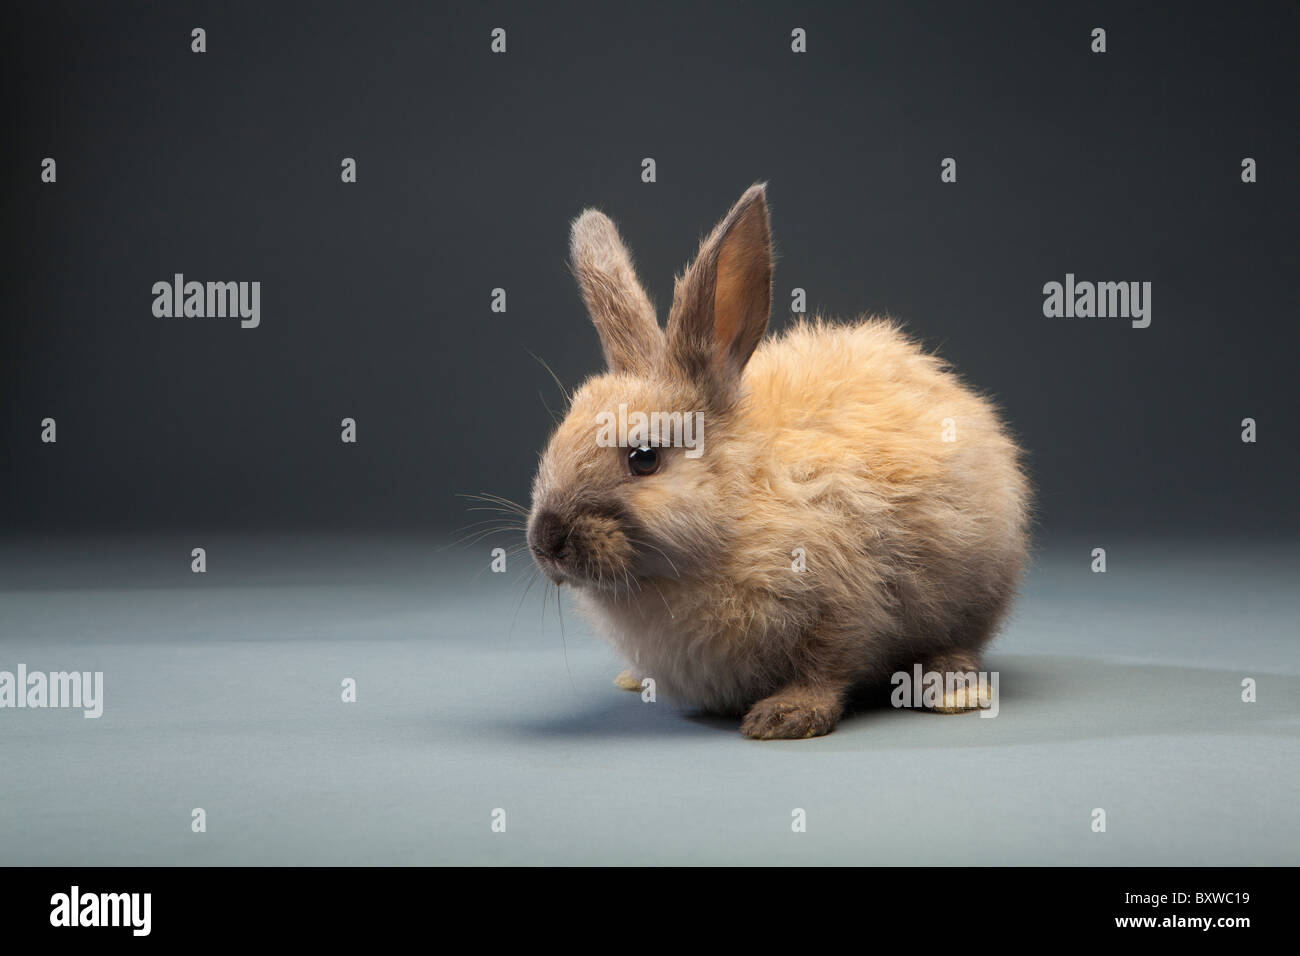 brown baby rabbit on gray background Stock Photo